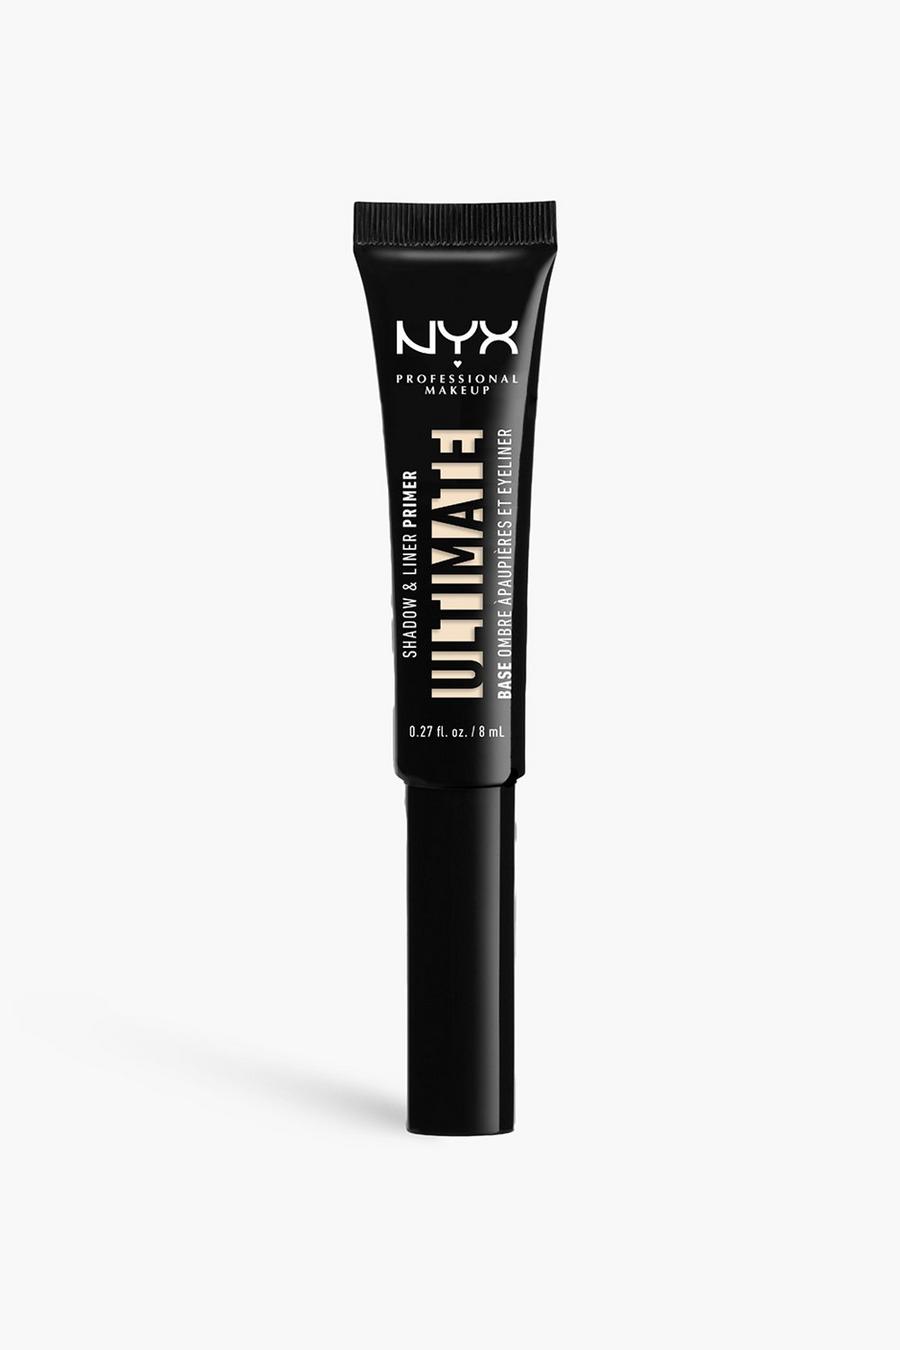 01 light NYX Professional Makeup Vitamin E Infused Ultimate Shadow and Liner Primer